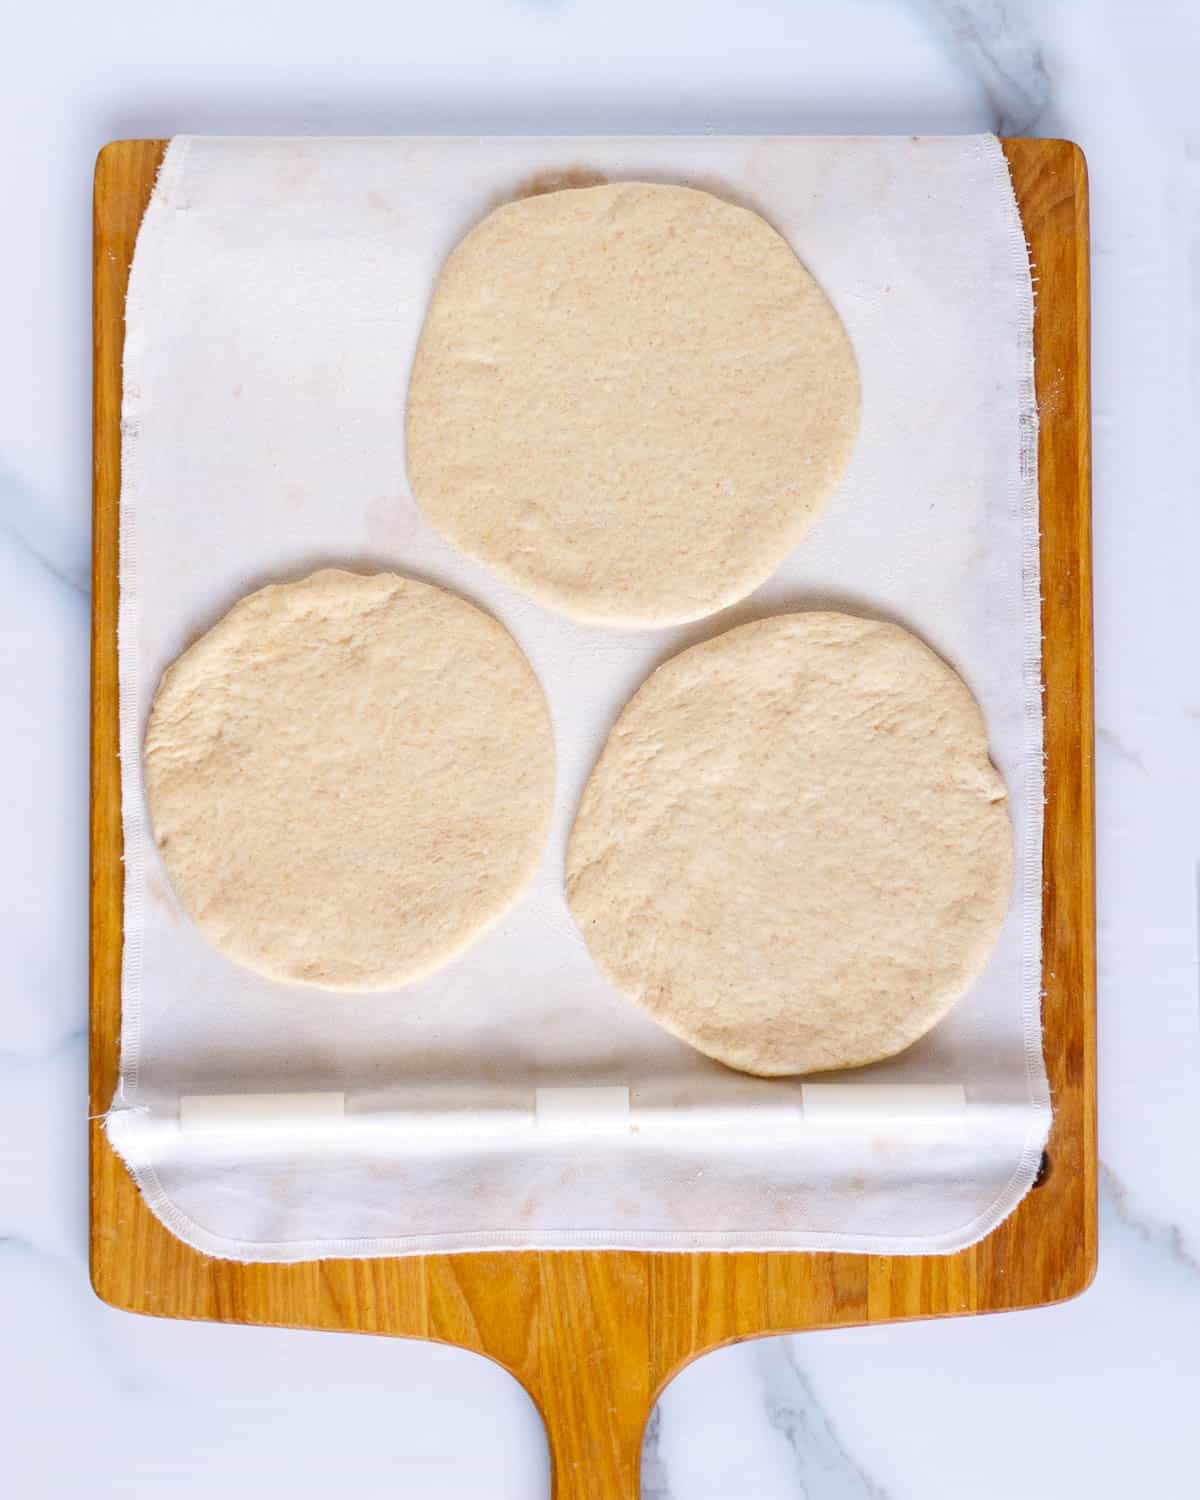 Three flat pieces of bread dough on a baking peel.